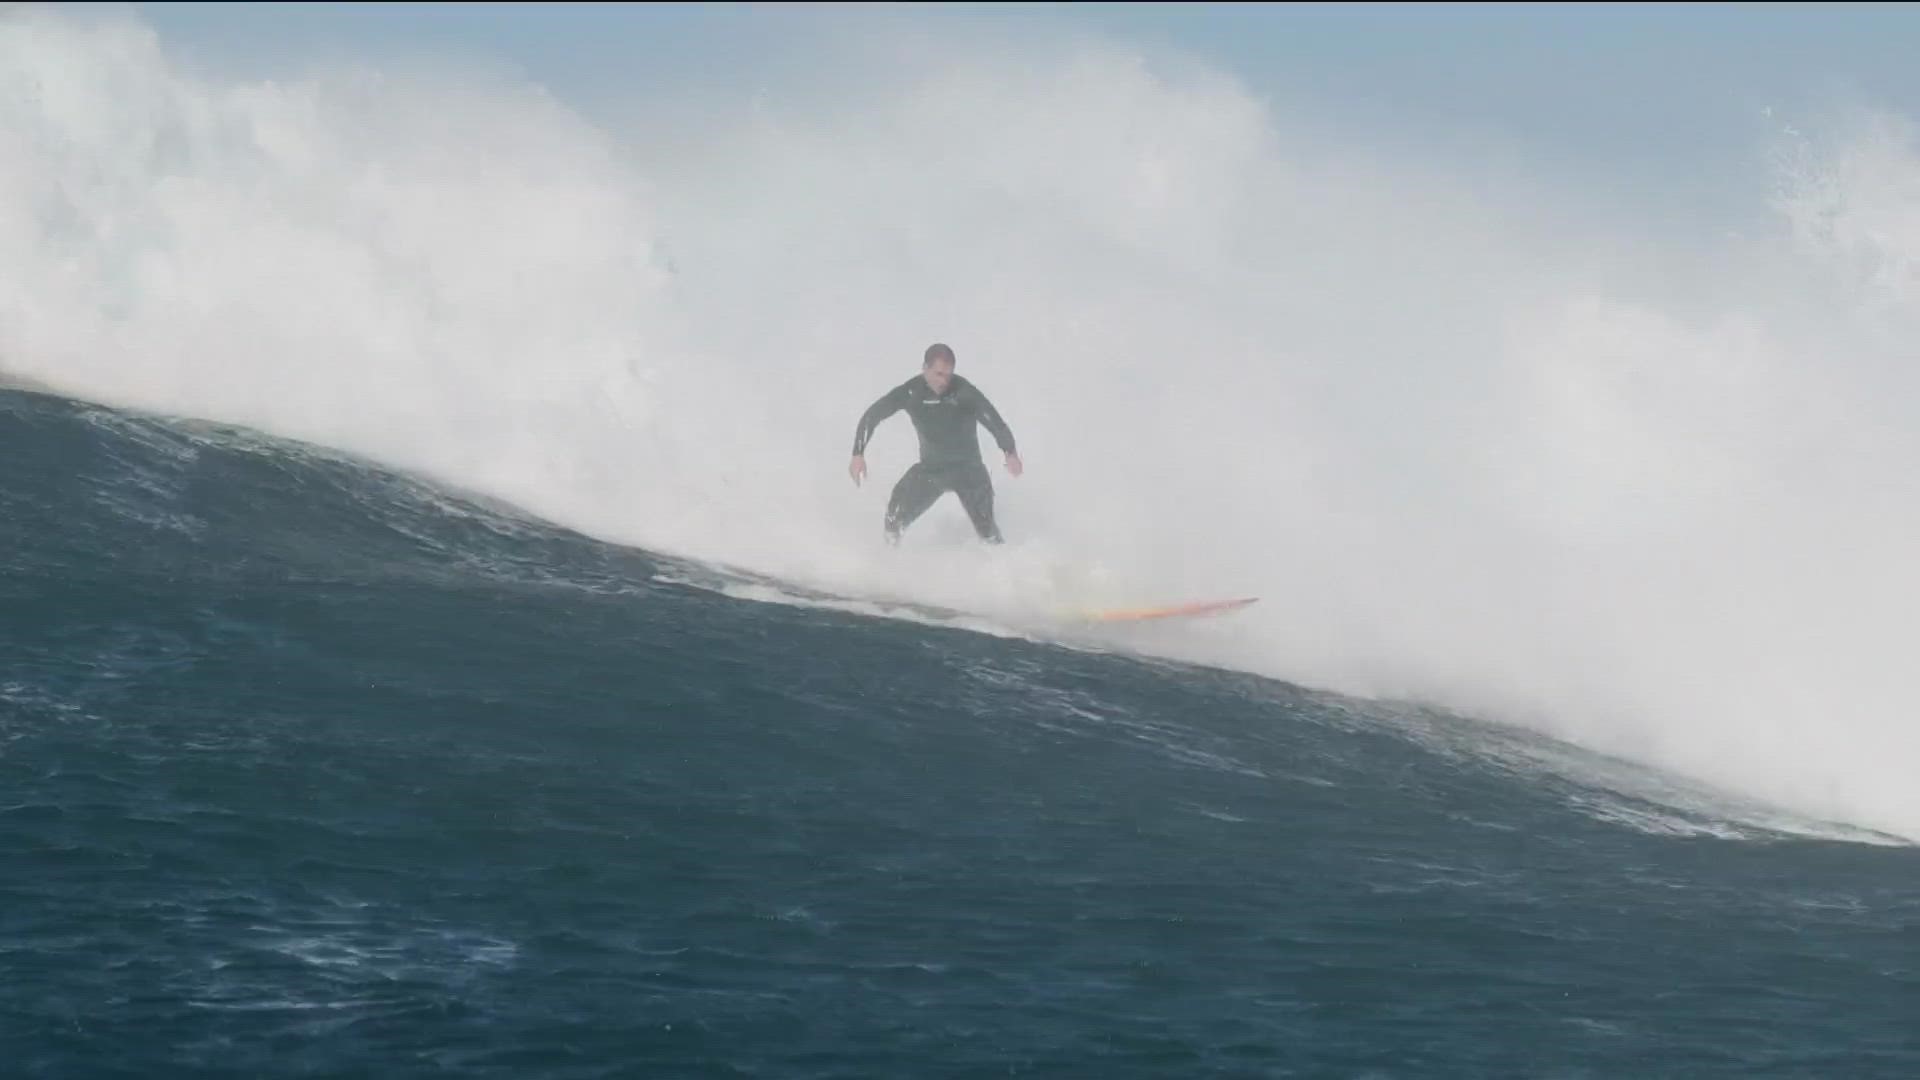 A local San Diegan and other big wave hunters traveled to Baja, California, where waves in the area towered over homes.